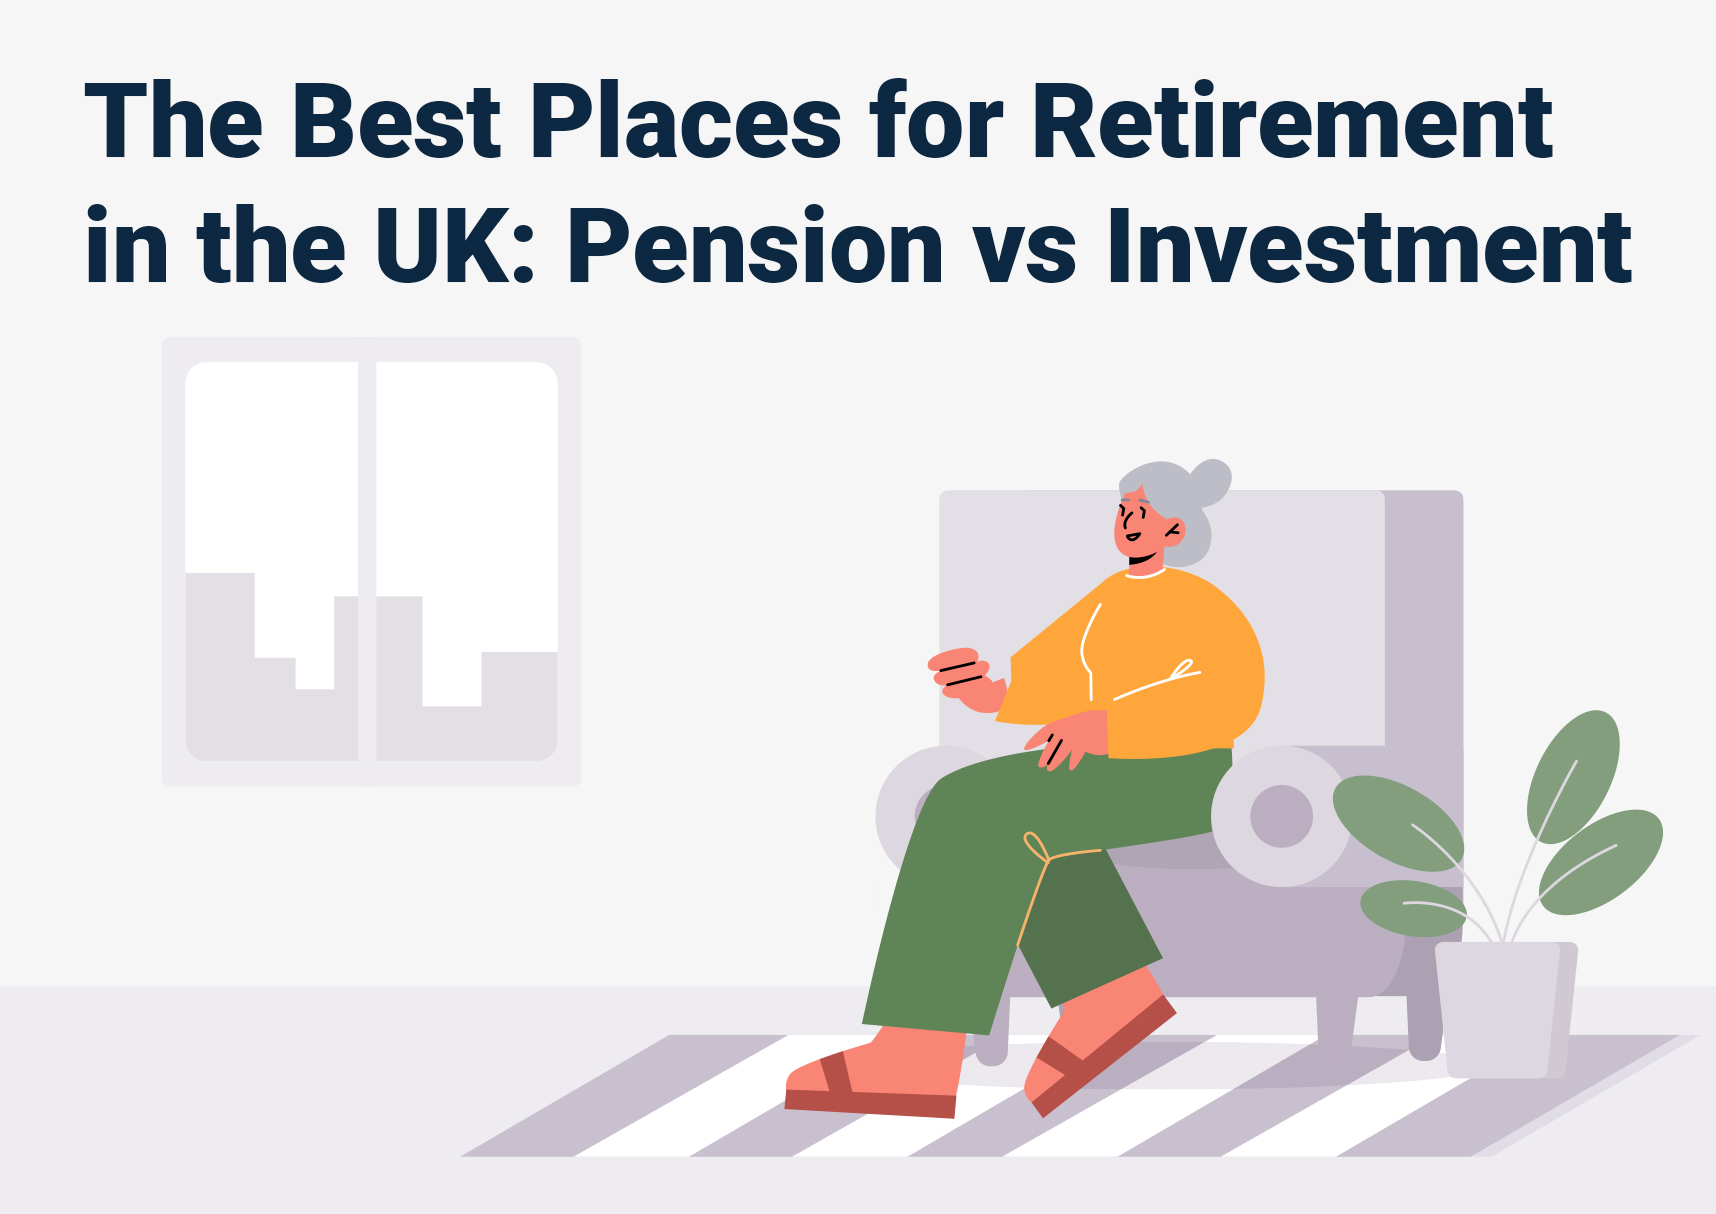 The Best Places for Retirement in the UK: Pension vs Investment